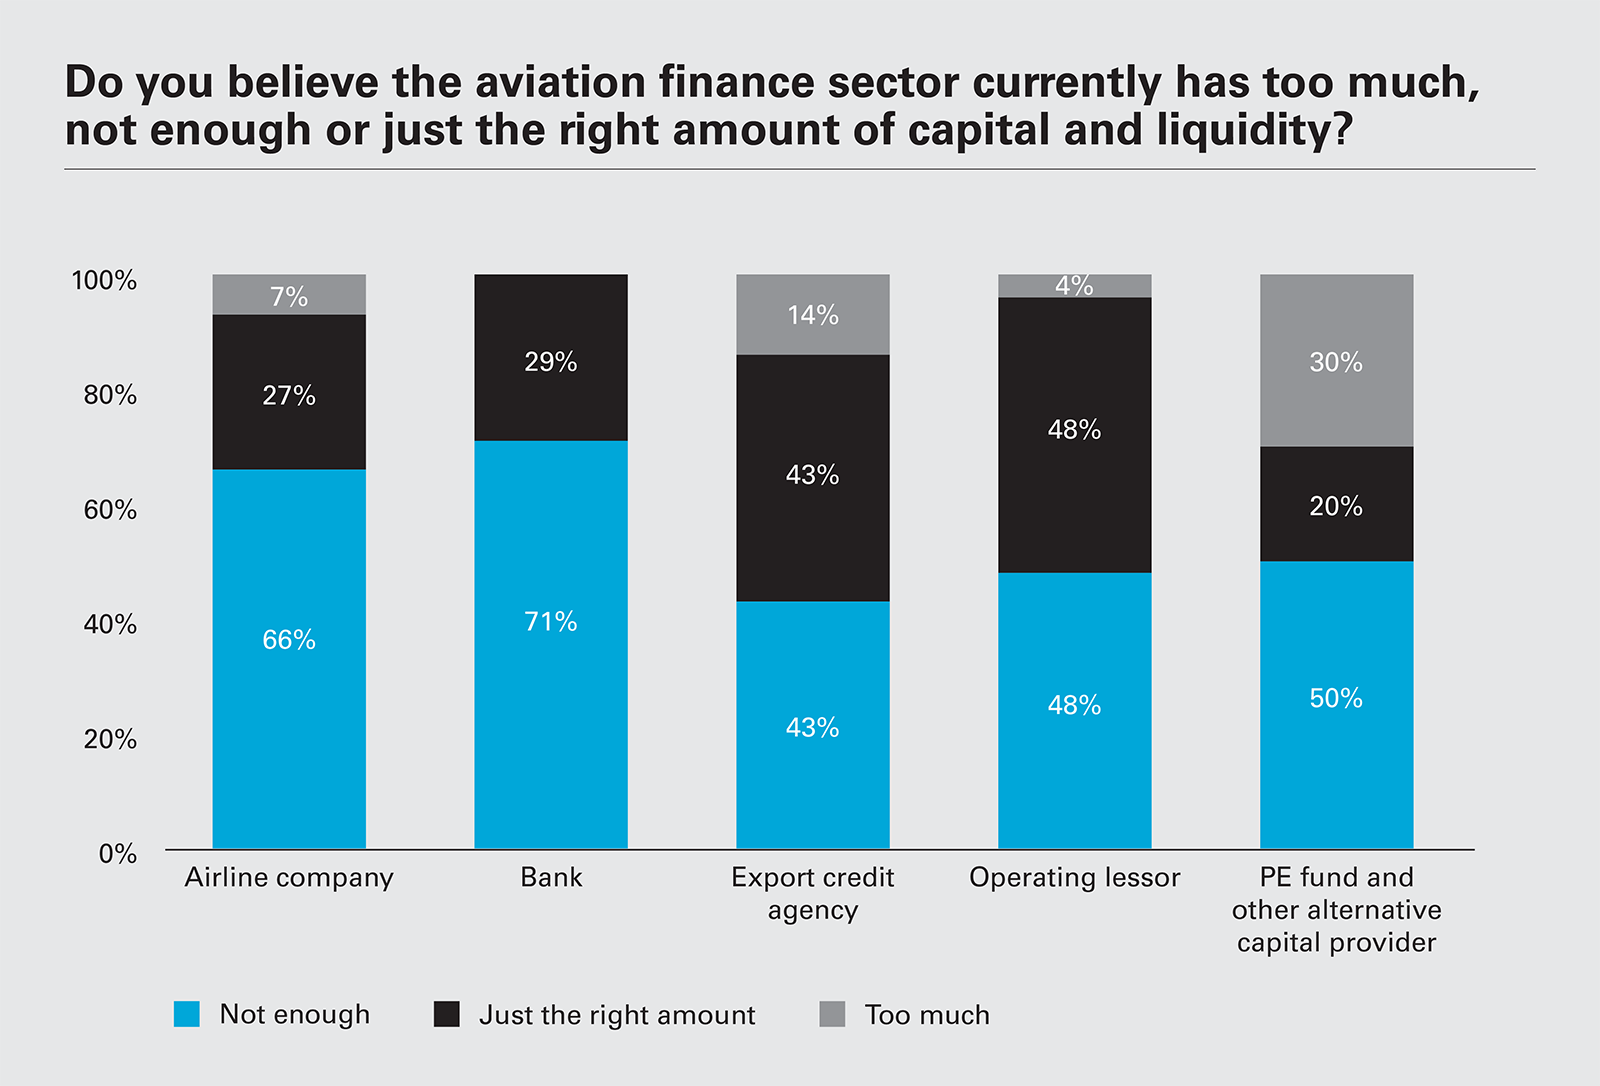 Do you believe the aviation finance sector currently has too much, not enough or just the right amount of capital and liquidity?